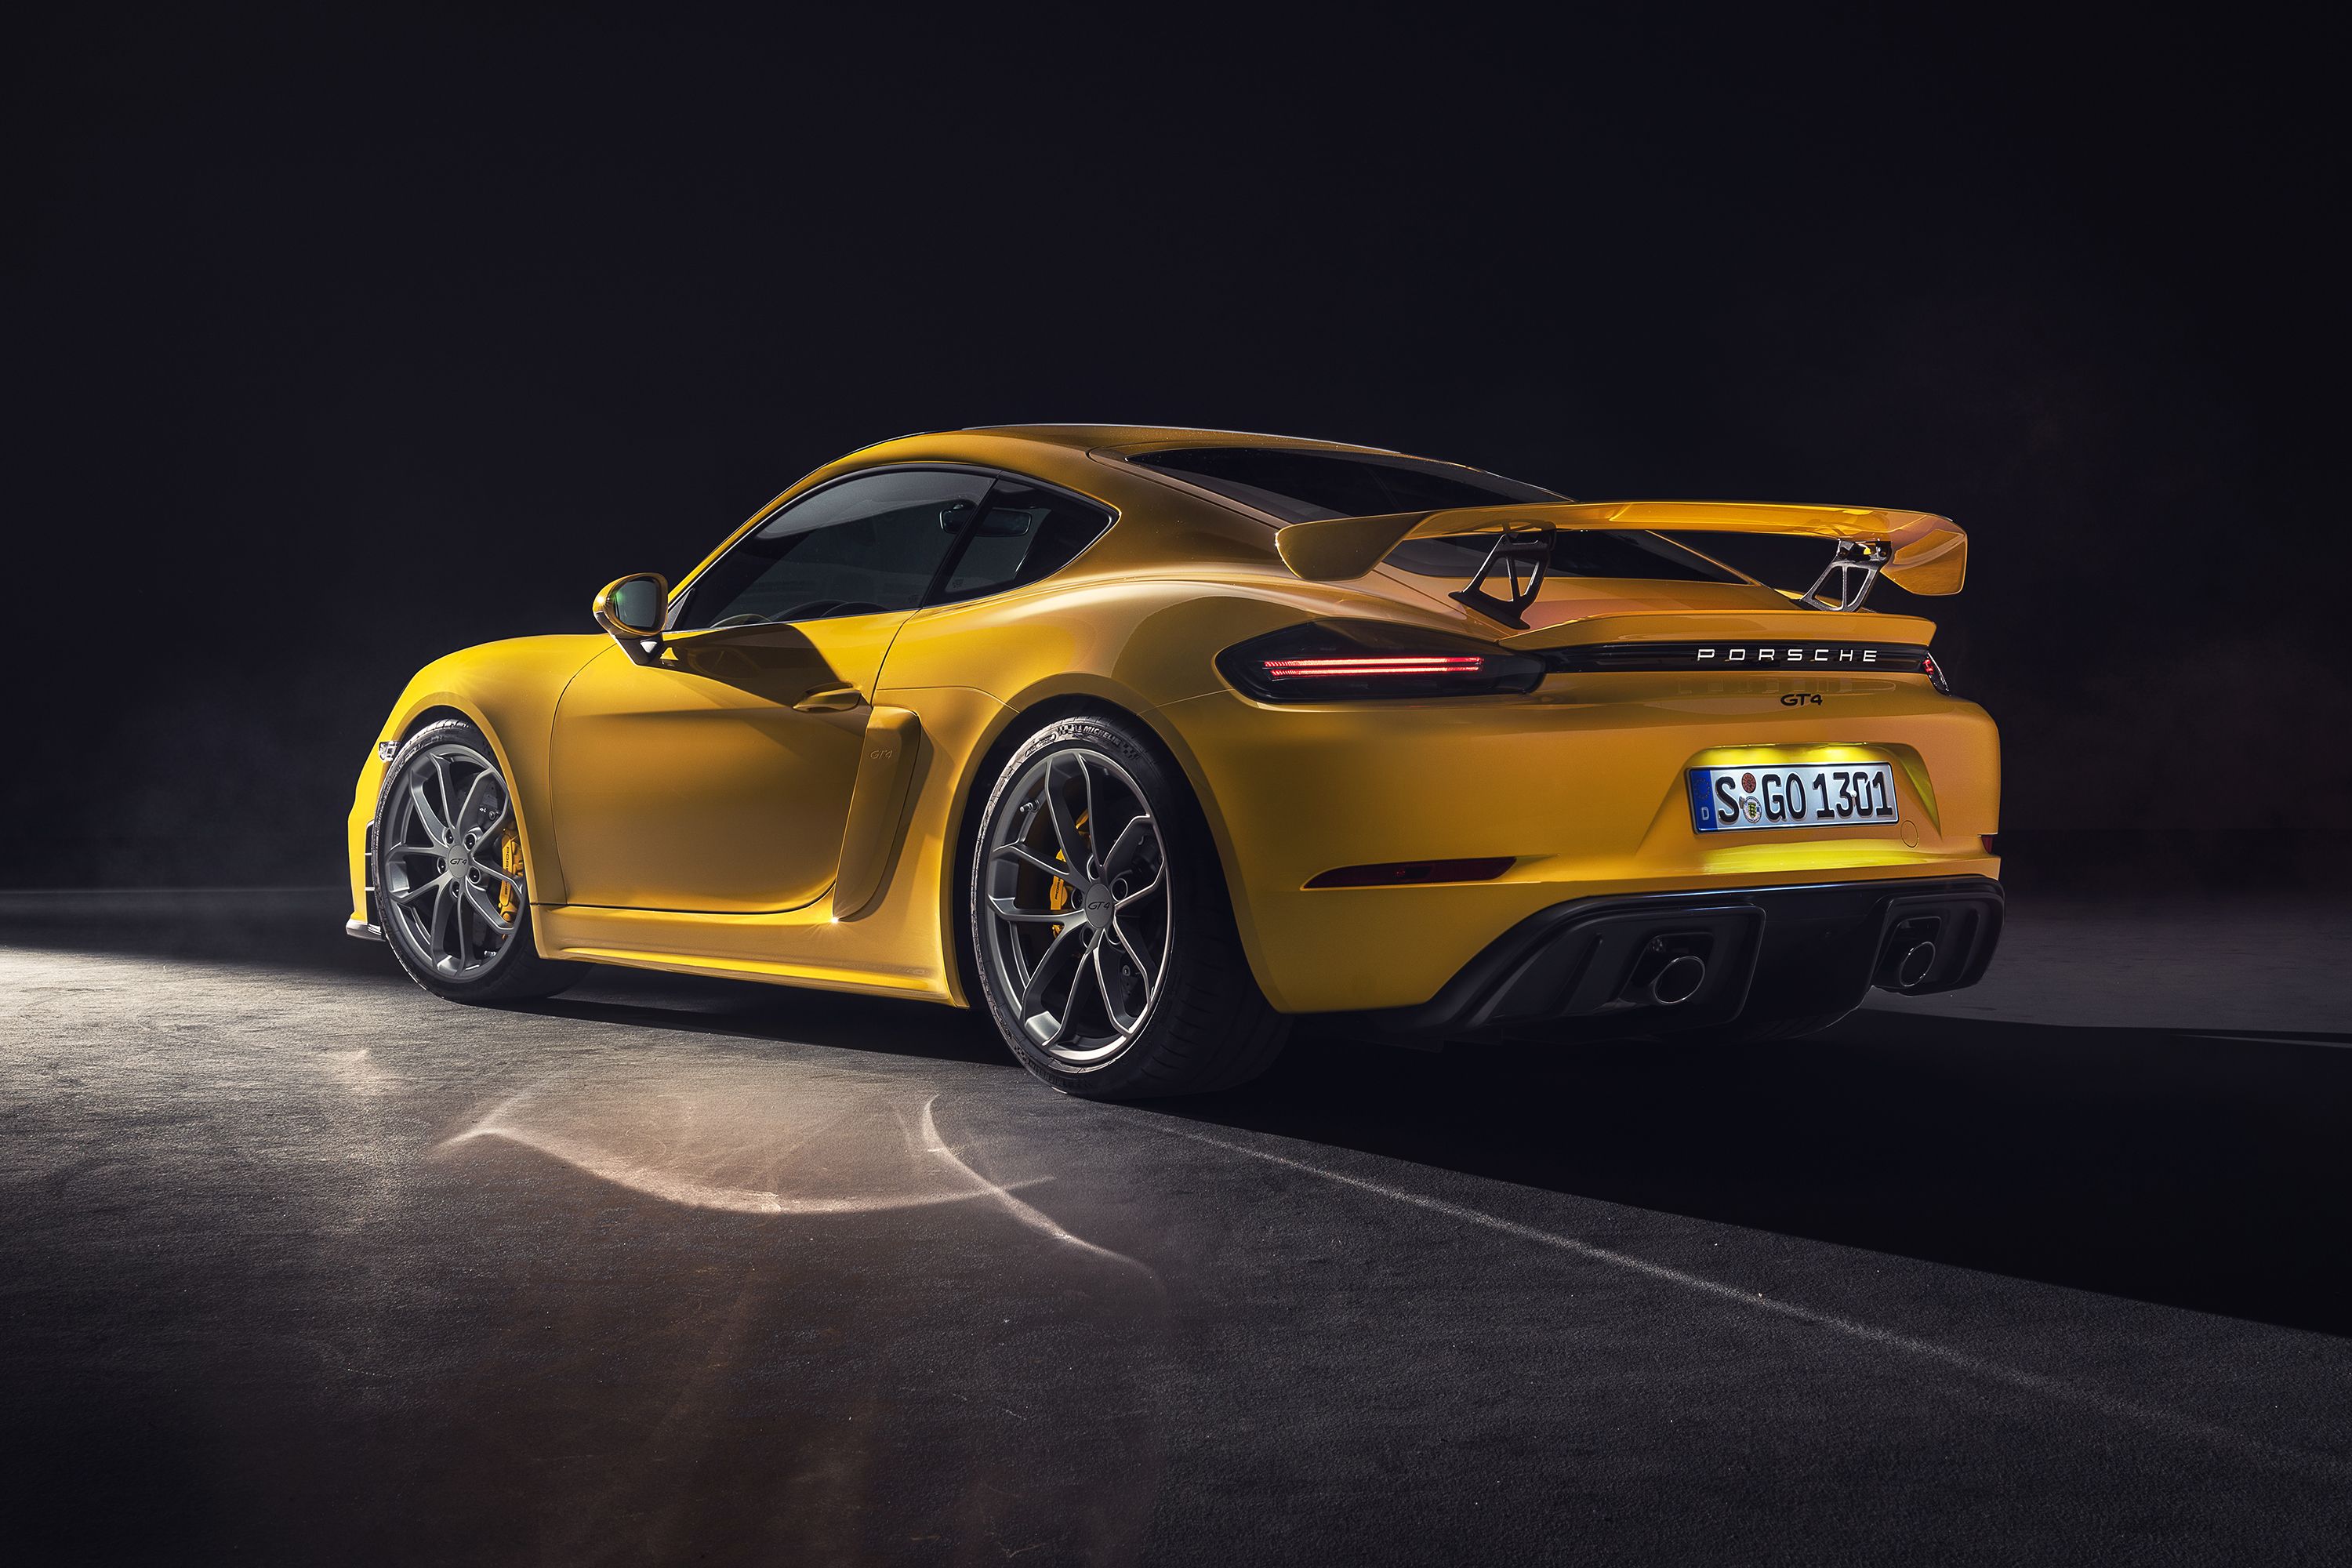 2020 Porsche 718 Cayman GT4 and Boxster Spyder Revealed With New Flat-Six